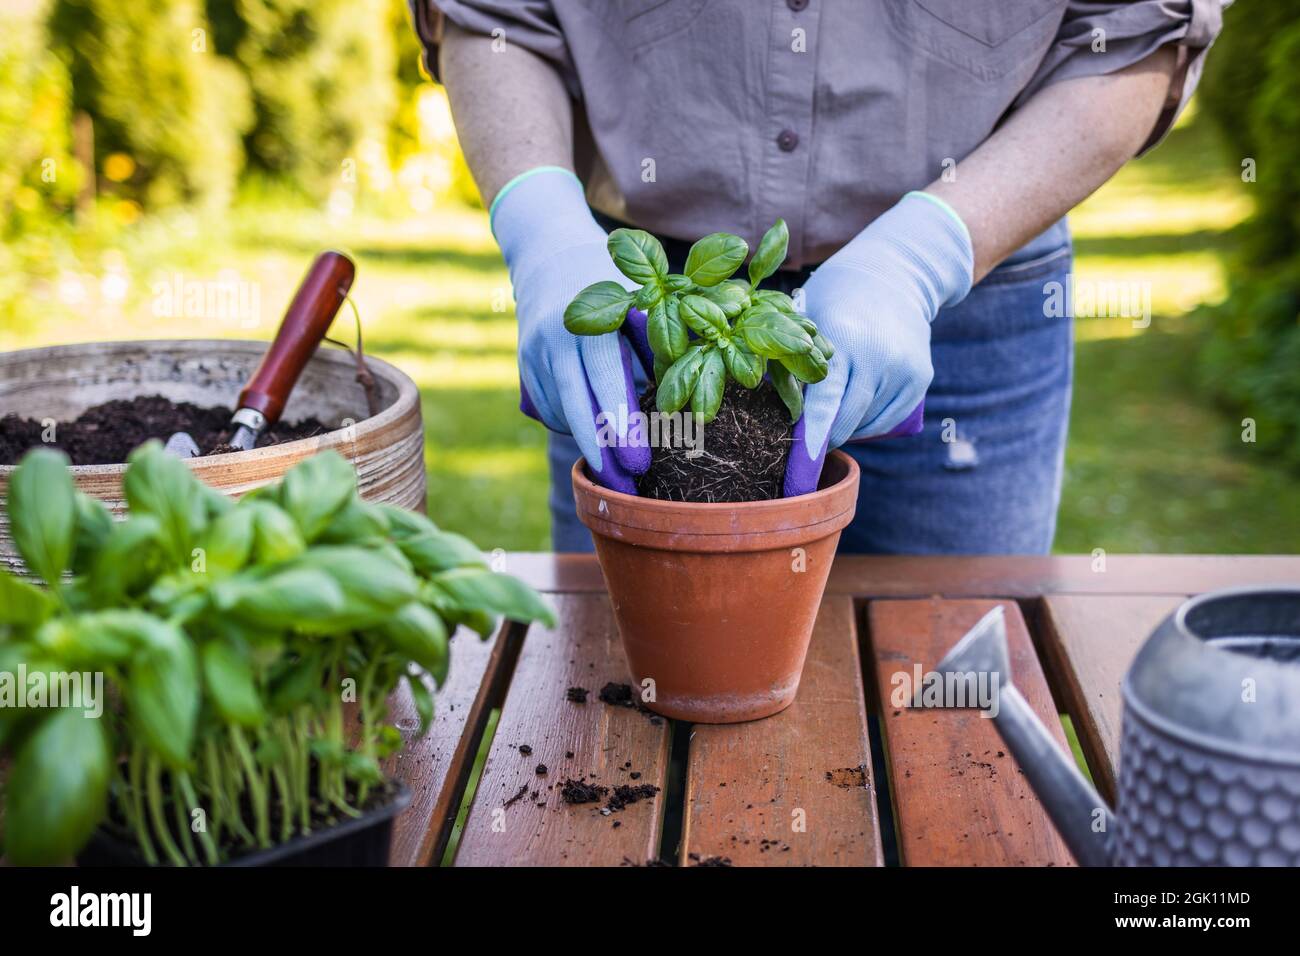 Woman with gardening glove planting basil herb into flower pot on table in garden Stock Photo